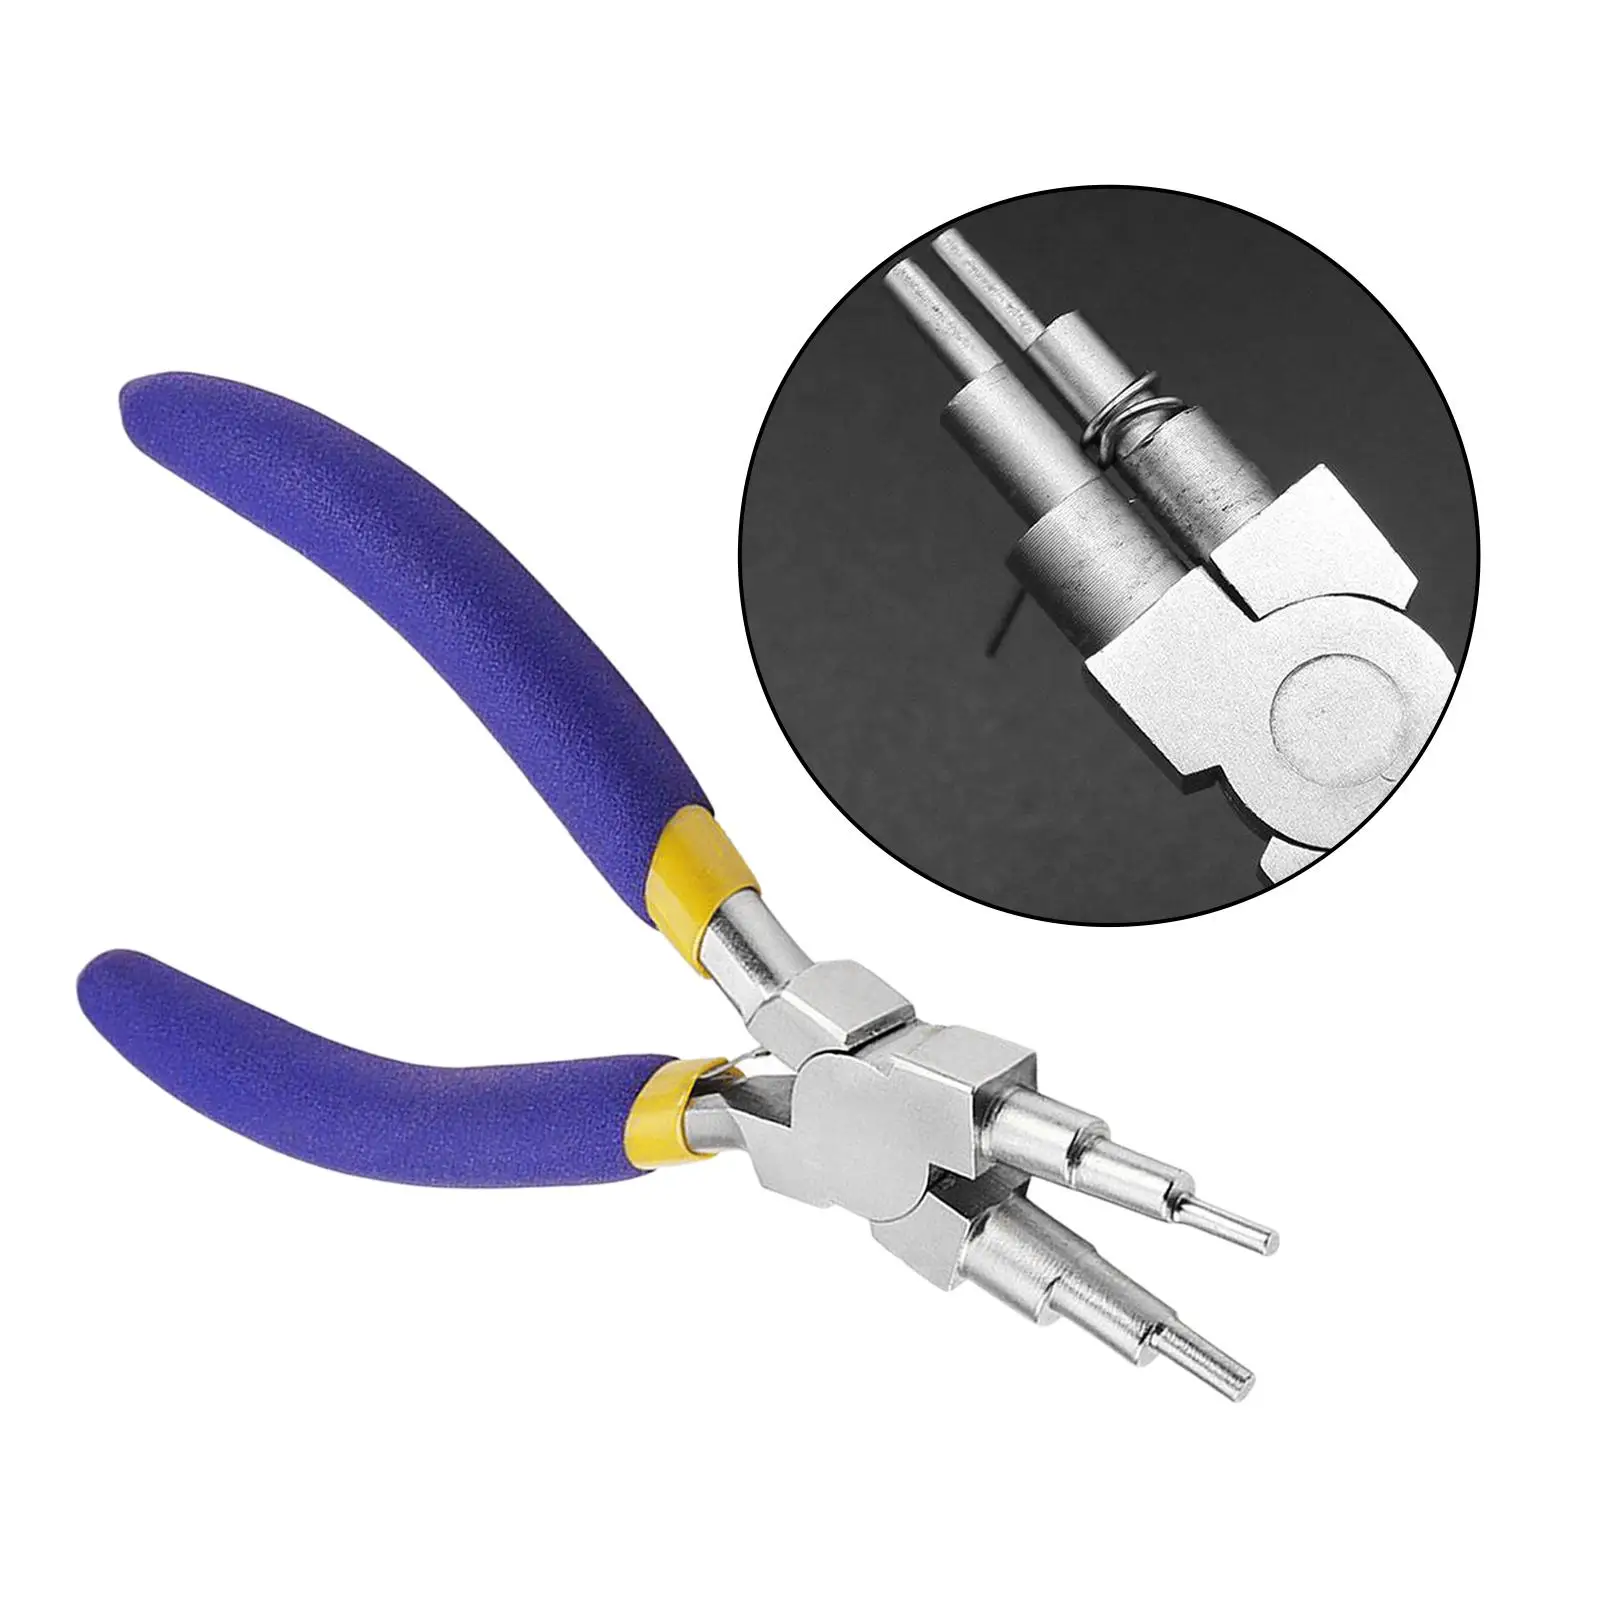 6-Step Bail Making Pliers Makes 2mm to 9mm Forming Jump  Jewelry Looping